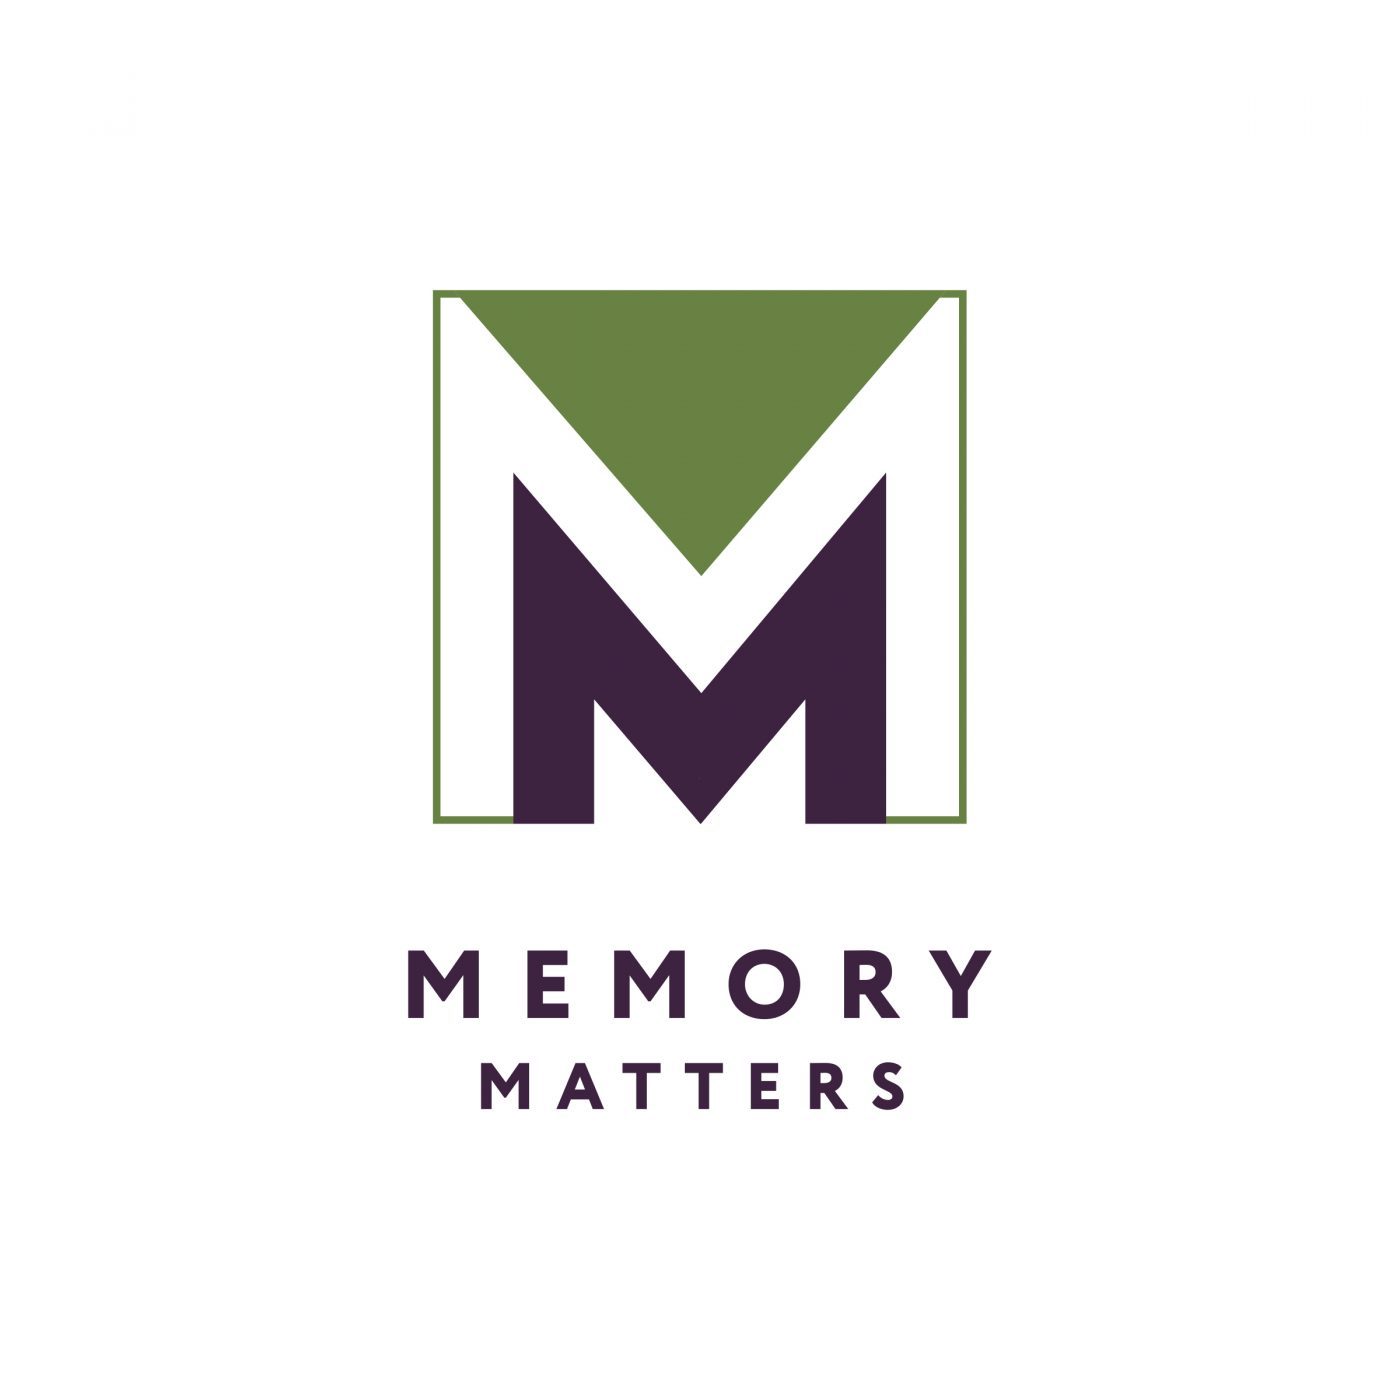 Let those senior moments be a distant memory • Memory Matters